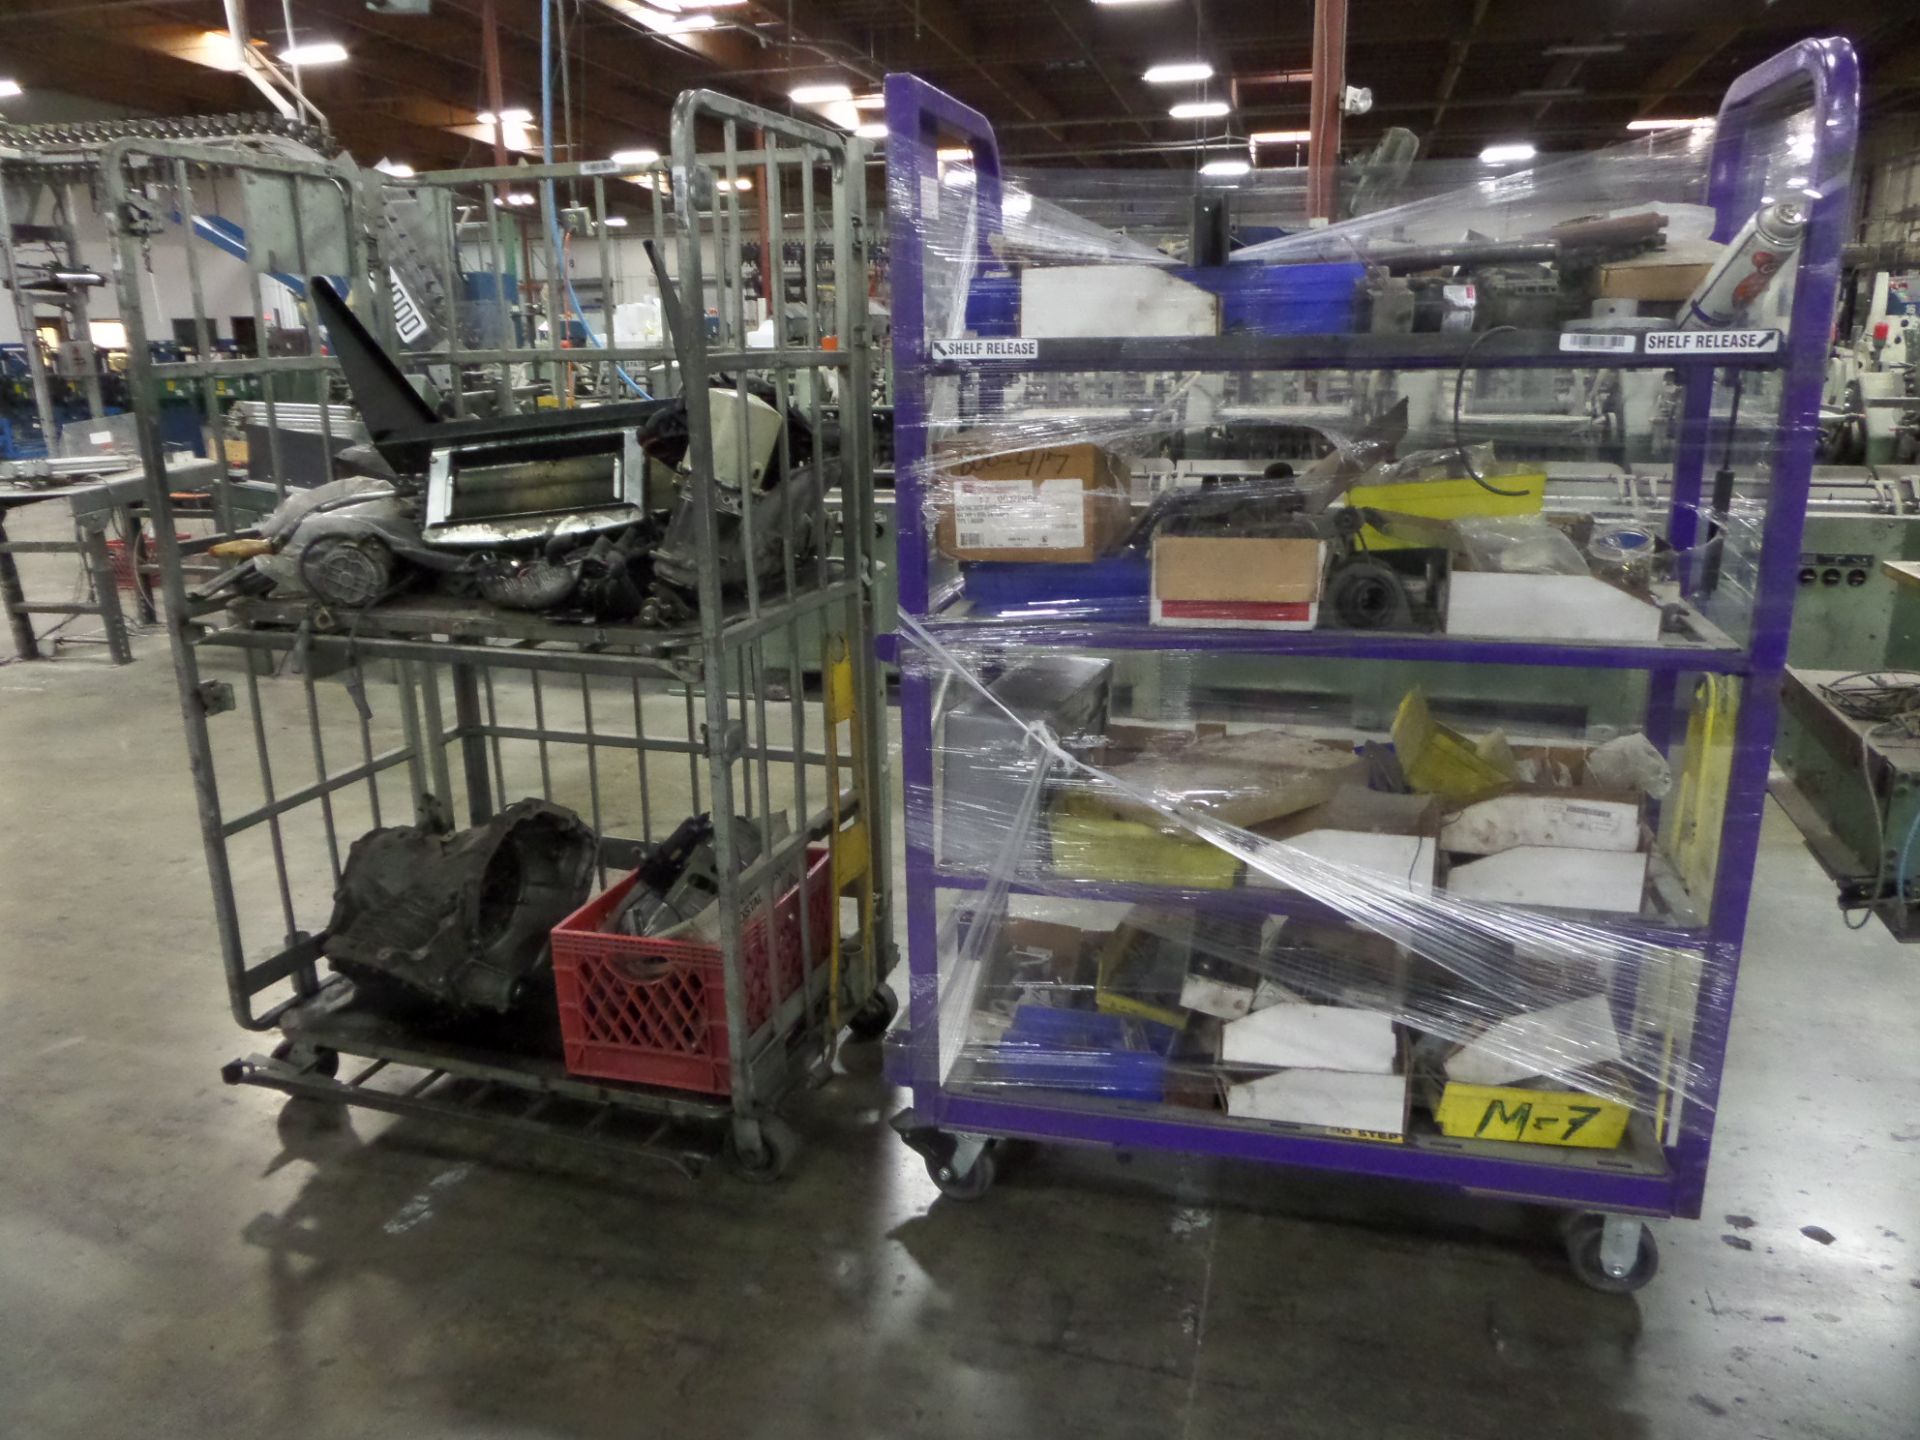 Pallets of Muller Inserter Parts and Conveyors with (2) Carts of Assorted Parts. Asset Location: - Image 7 of 7